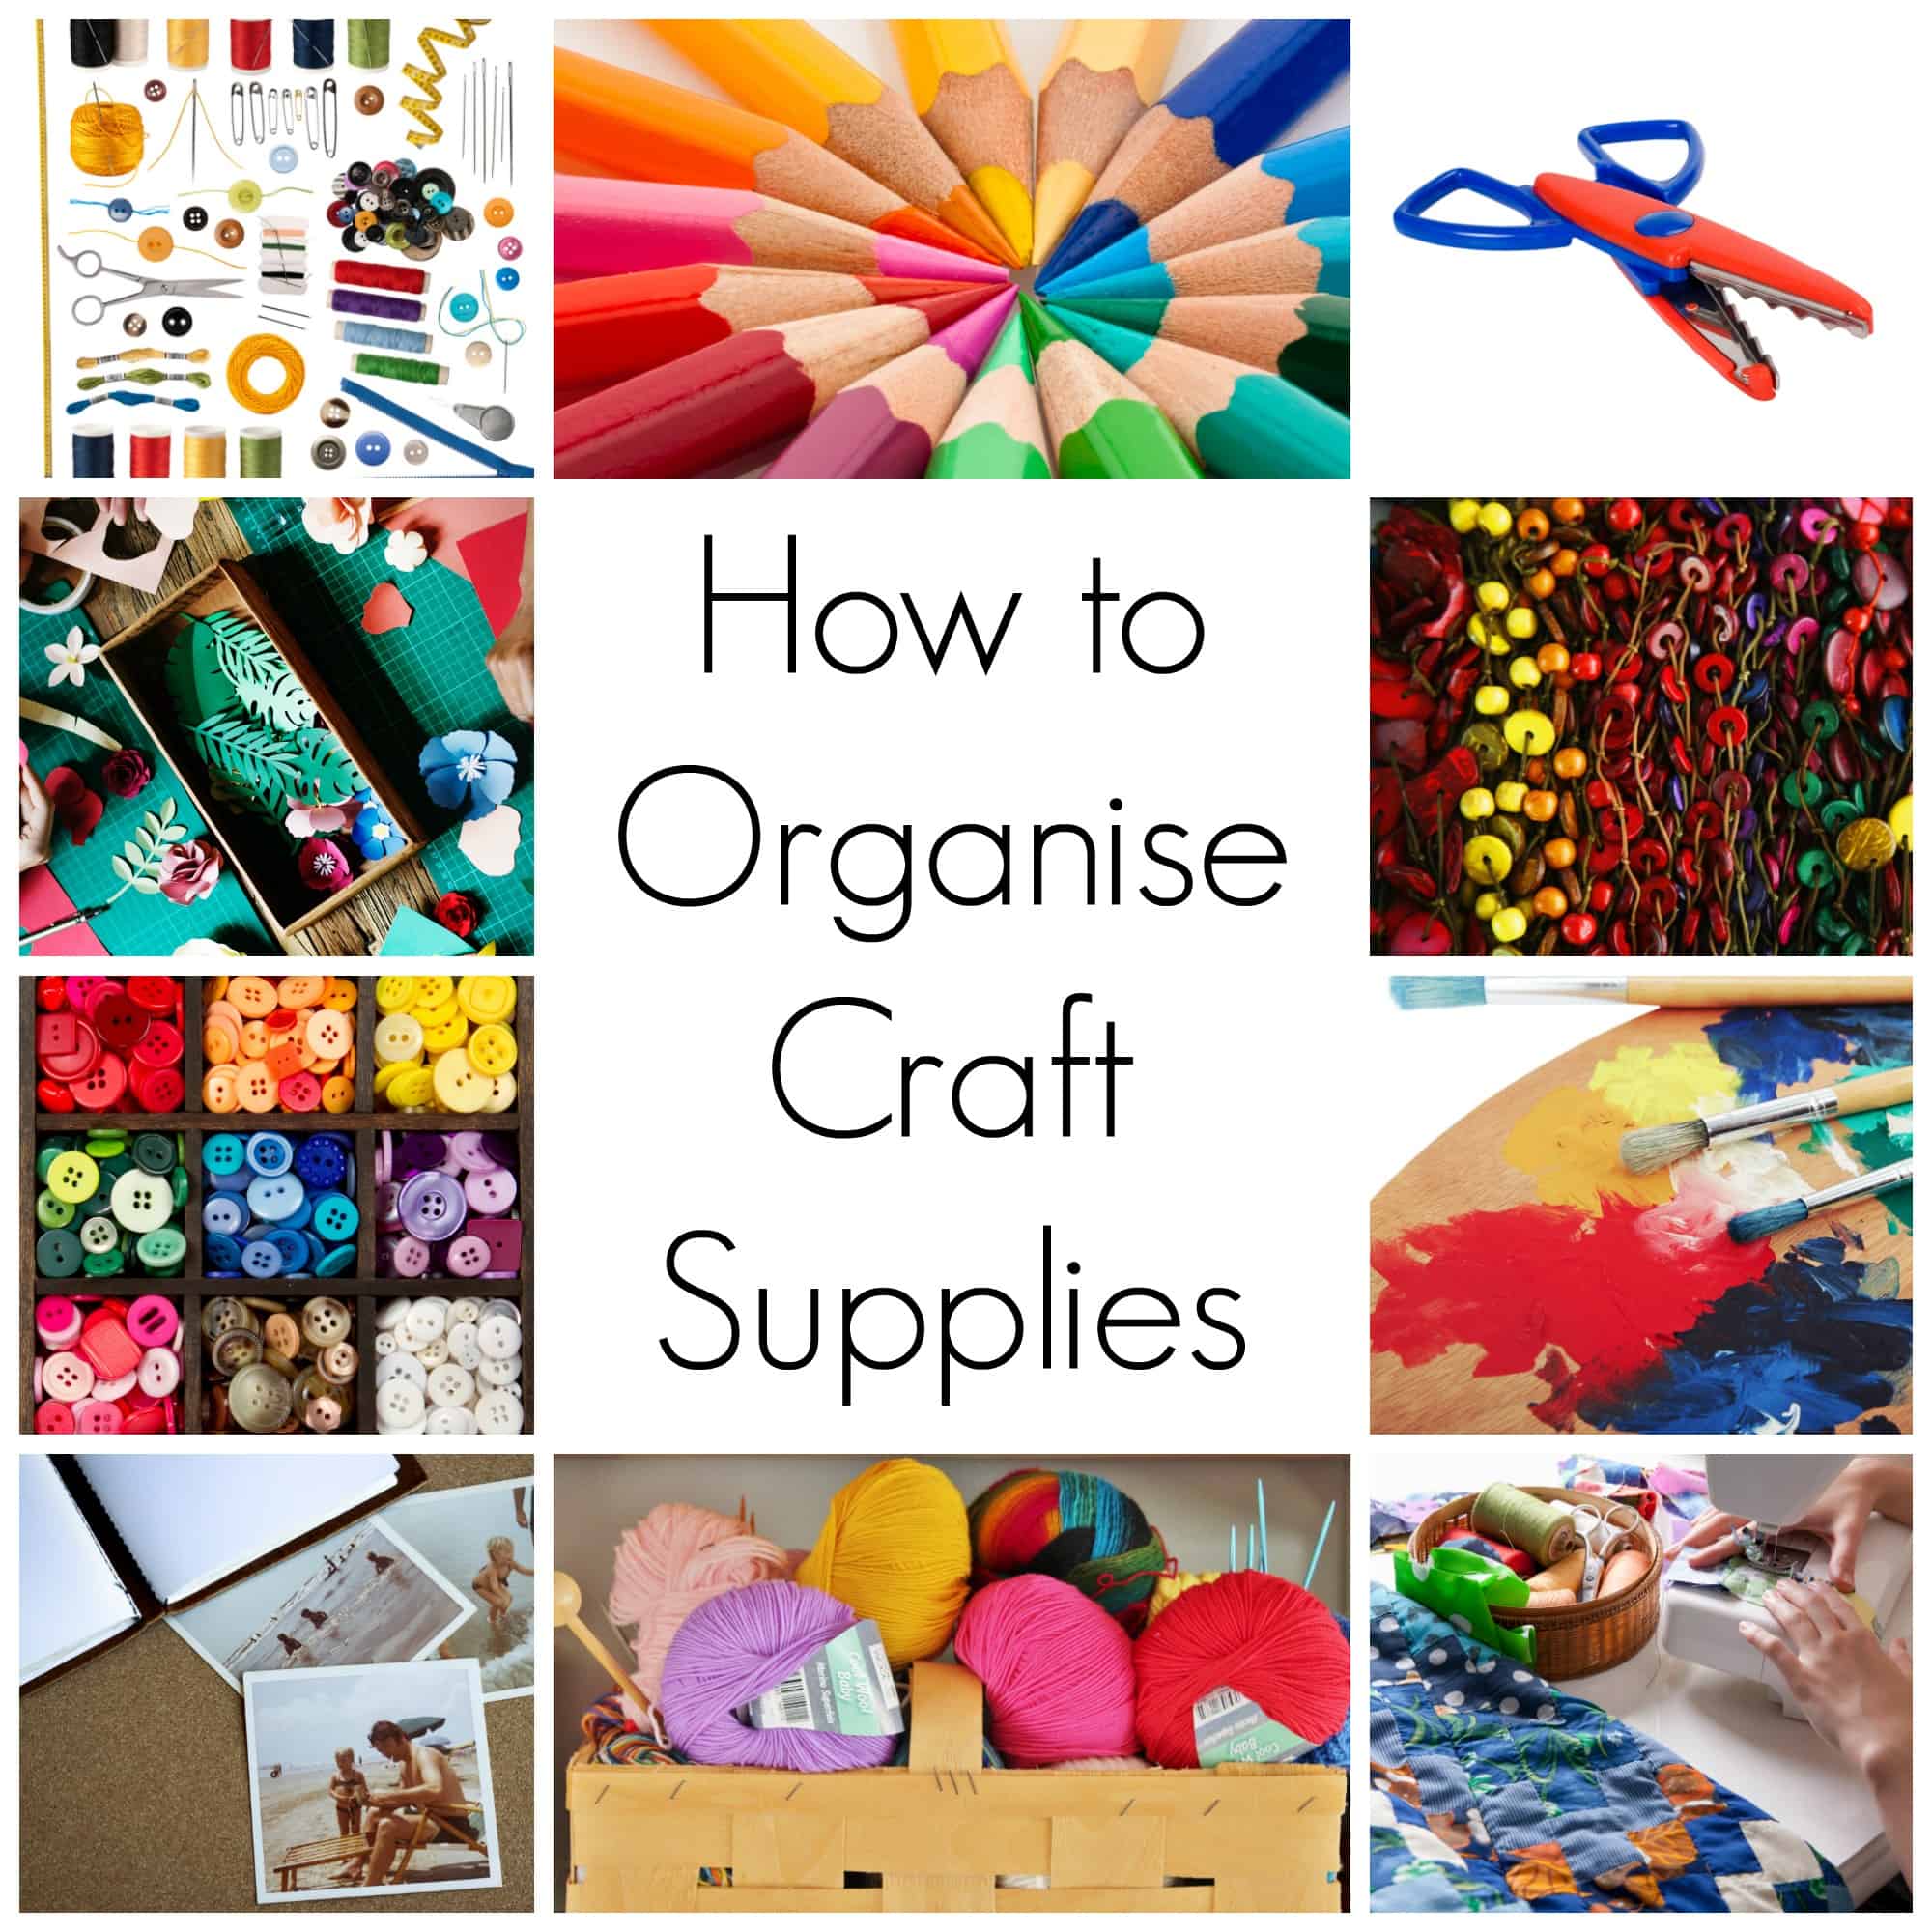 How to Organise Craft Supplies